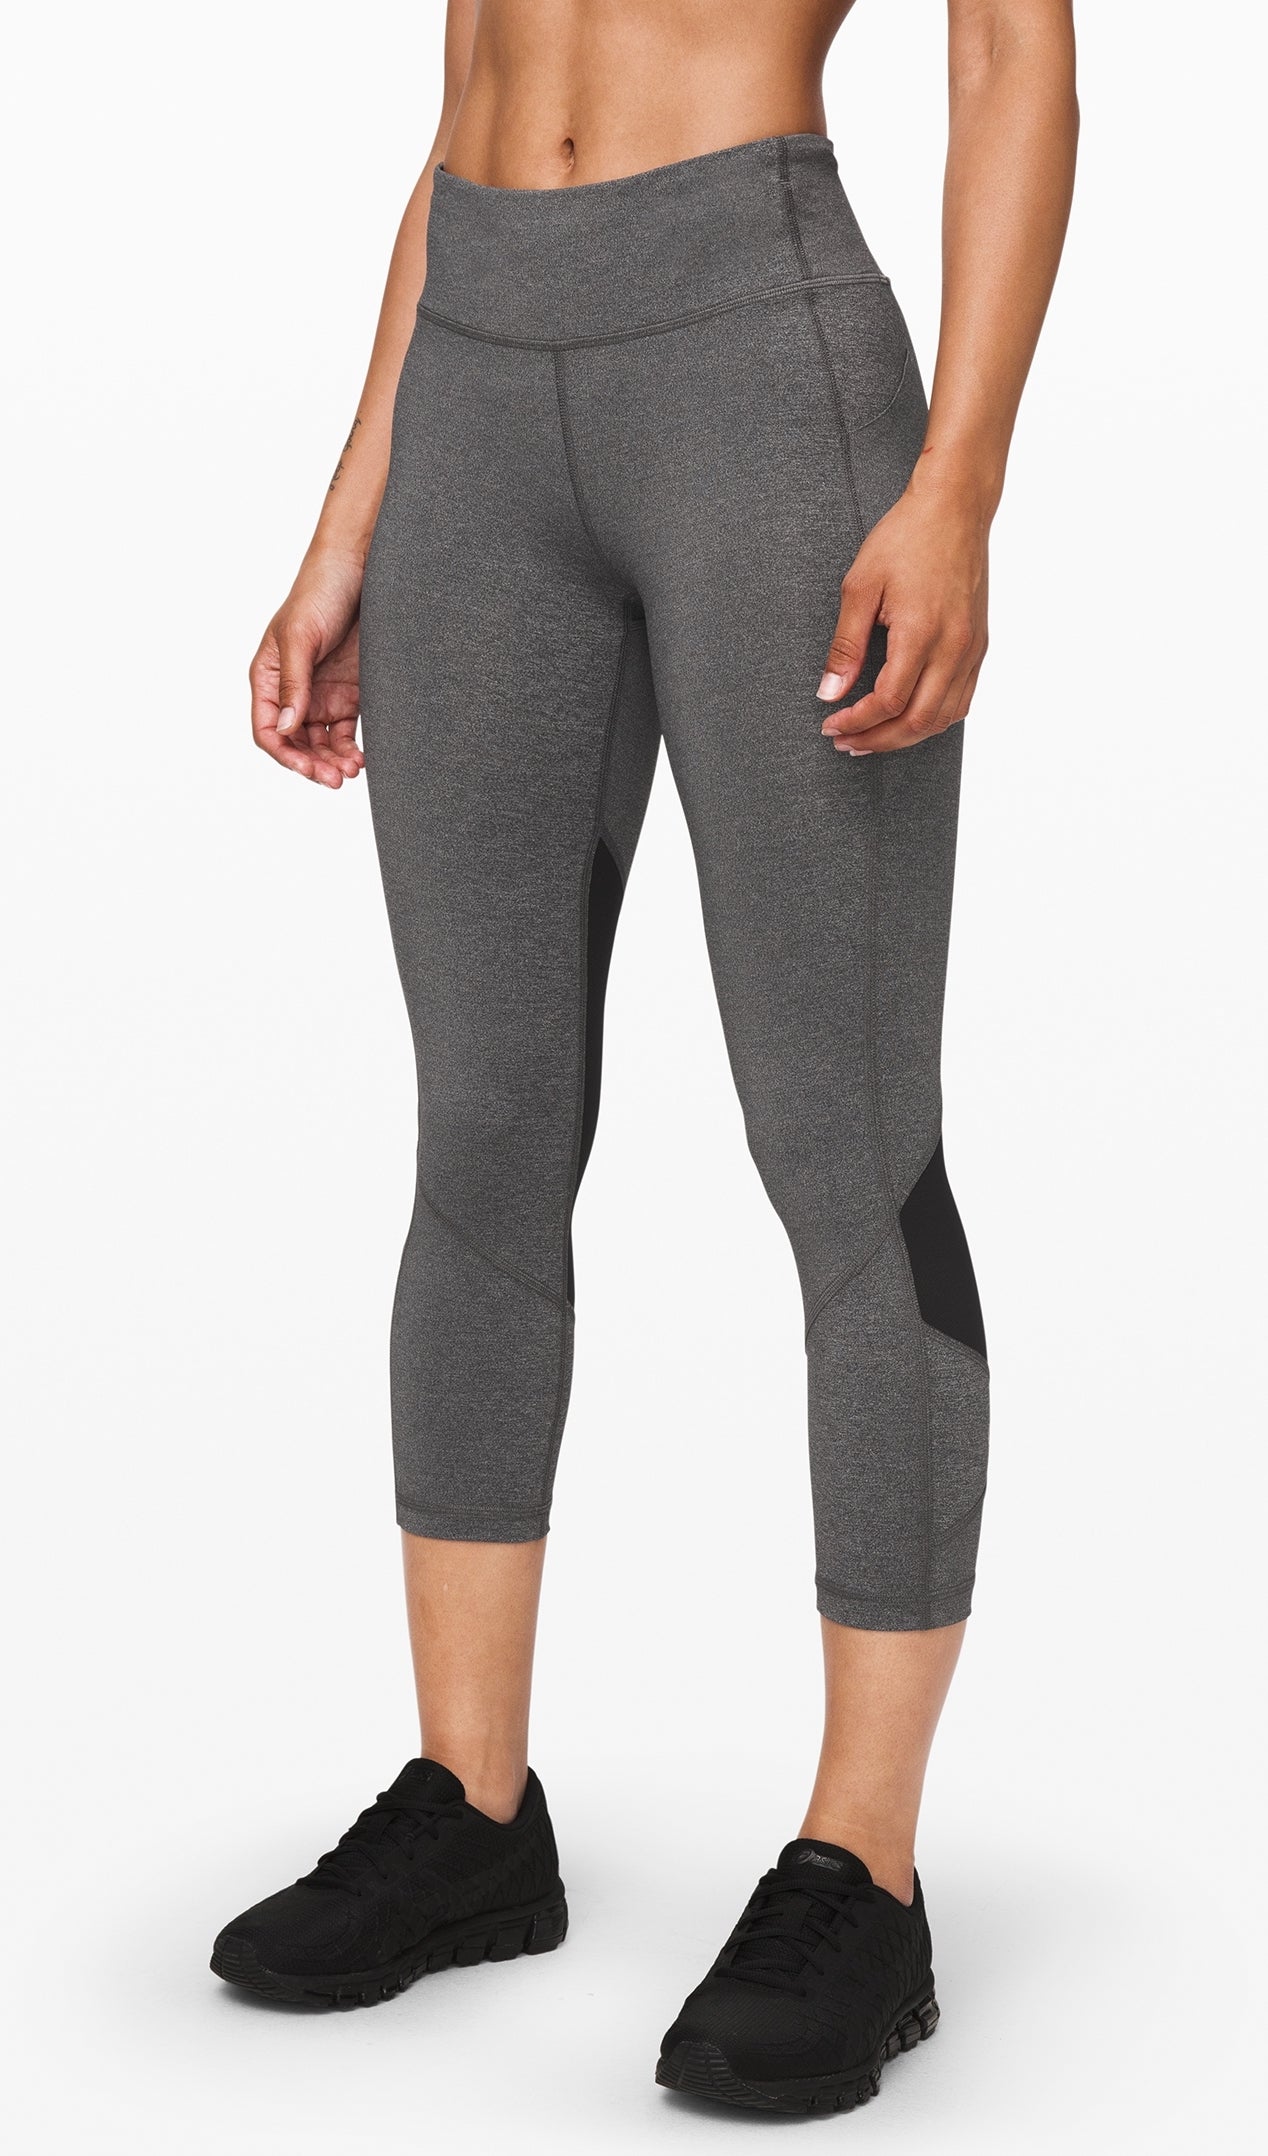 Lululemon online launches in the U.K.